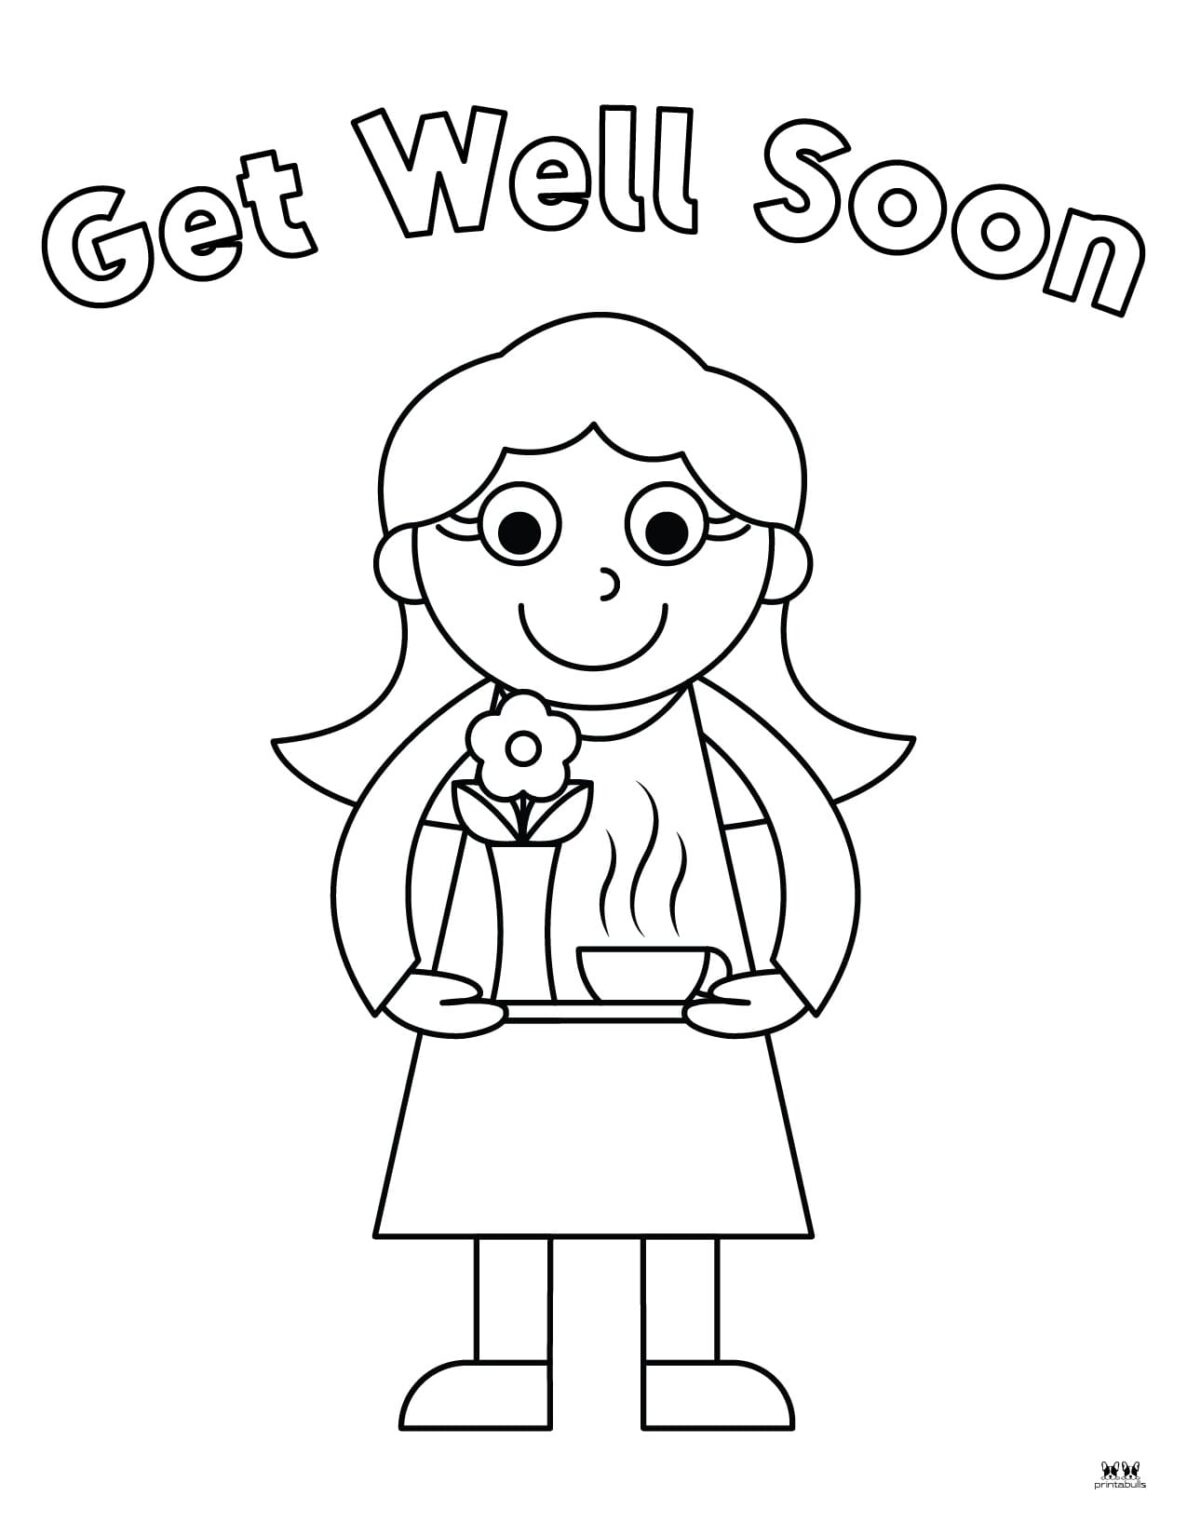 Get Well Soon Coloring Pages - 15 FREE Pages | Printabulls